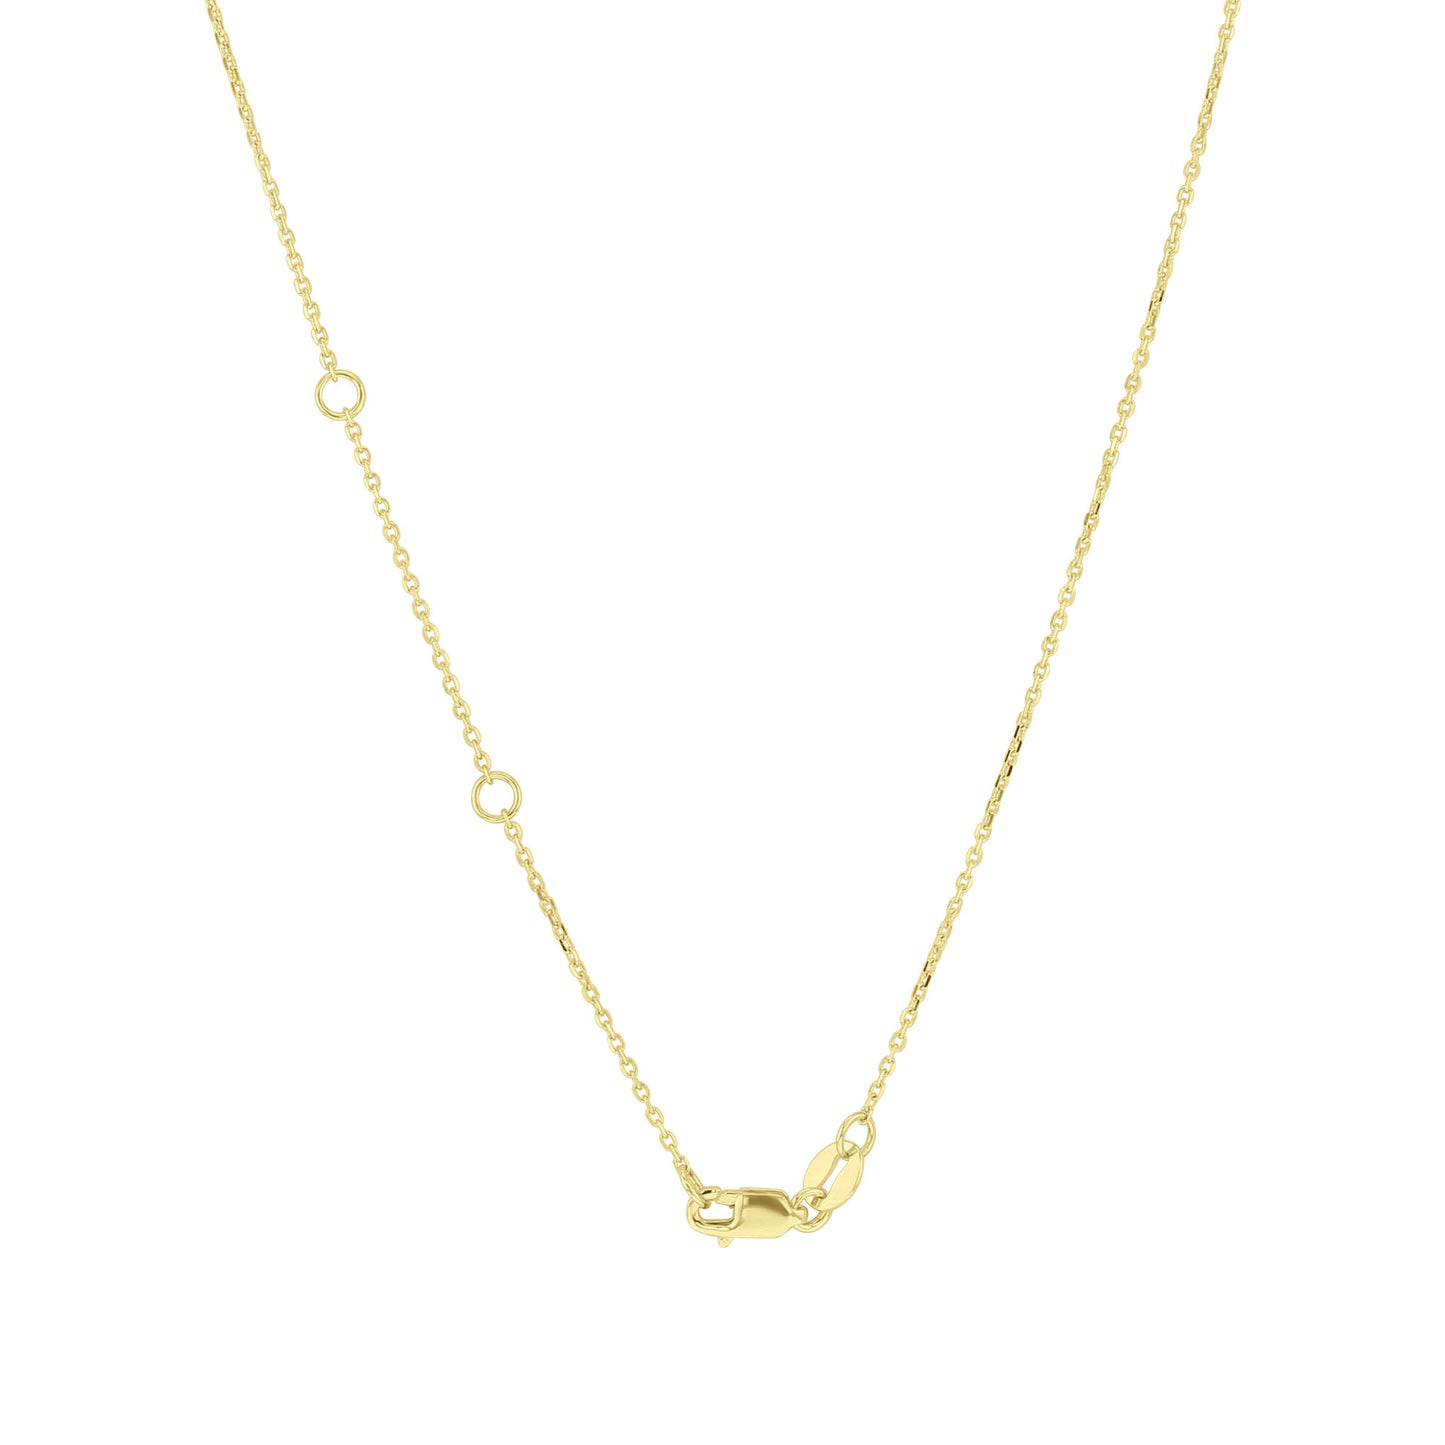 Petite Sacred Gold Cross Necklace